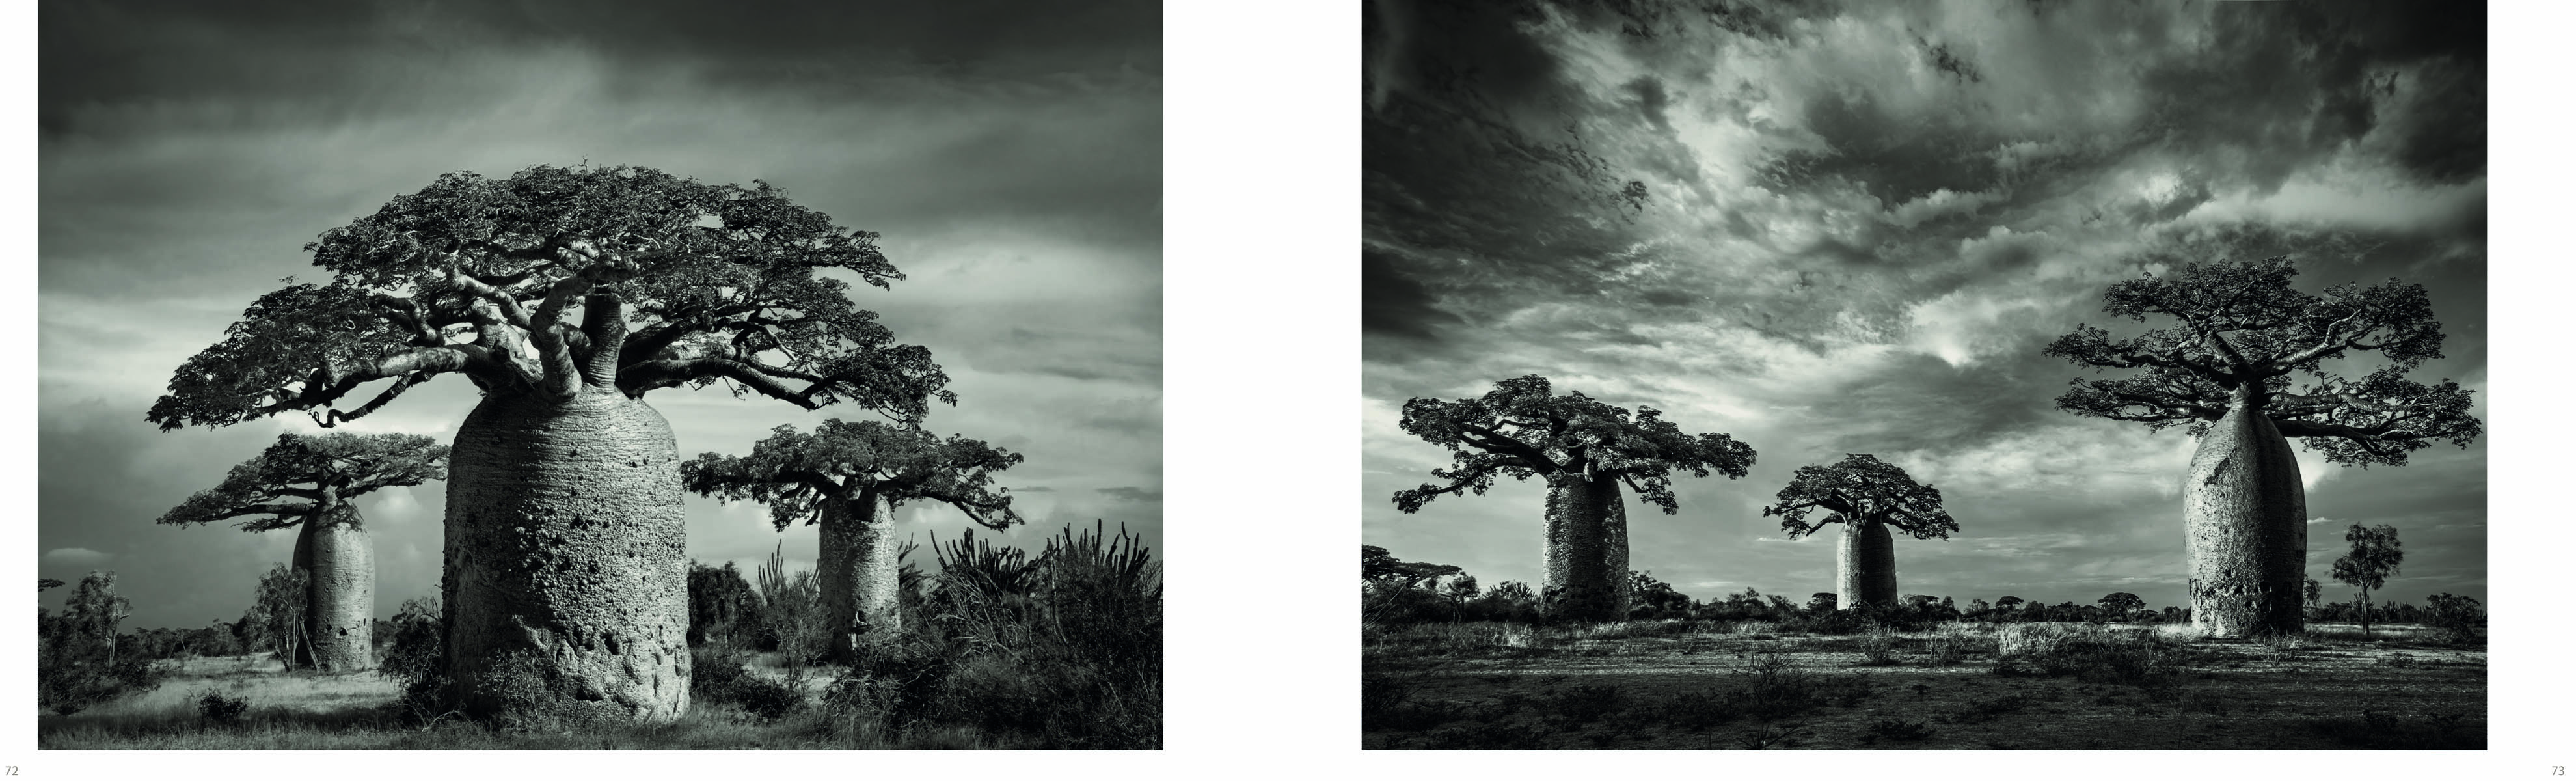 Dramatic sepia landscape photo of 4 large Baobab trees with impressive trunks and Baobab in white font above